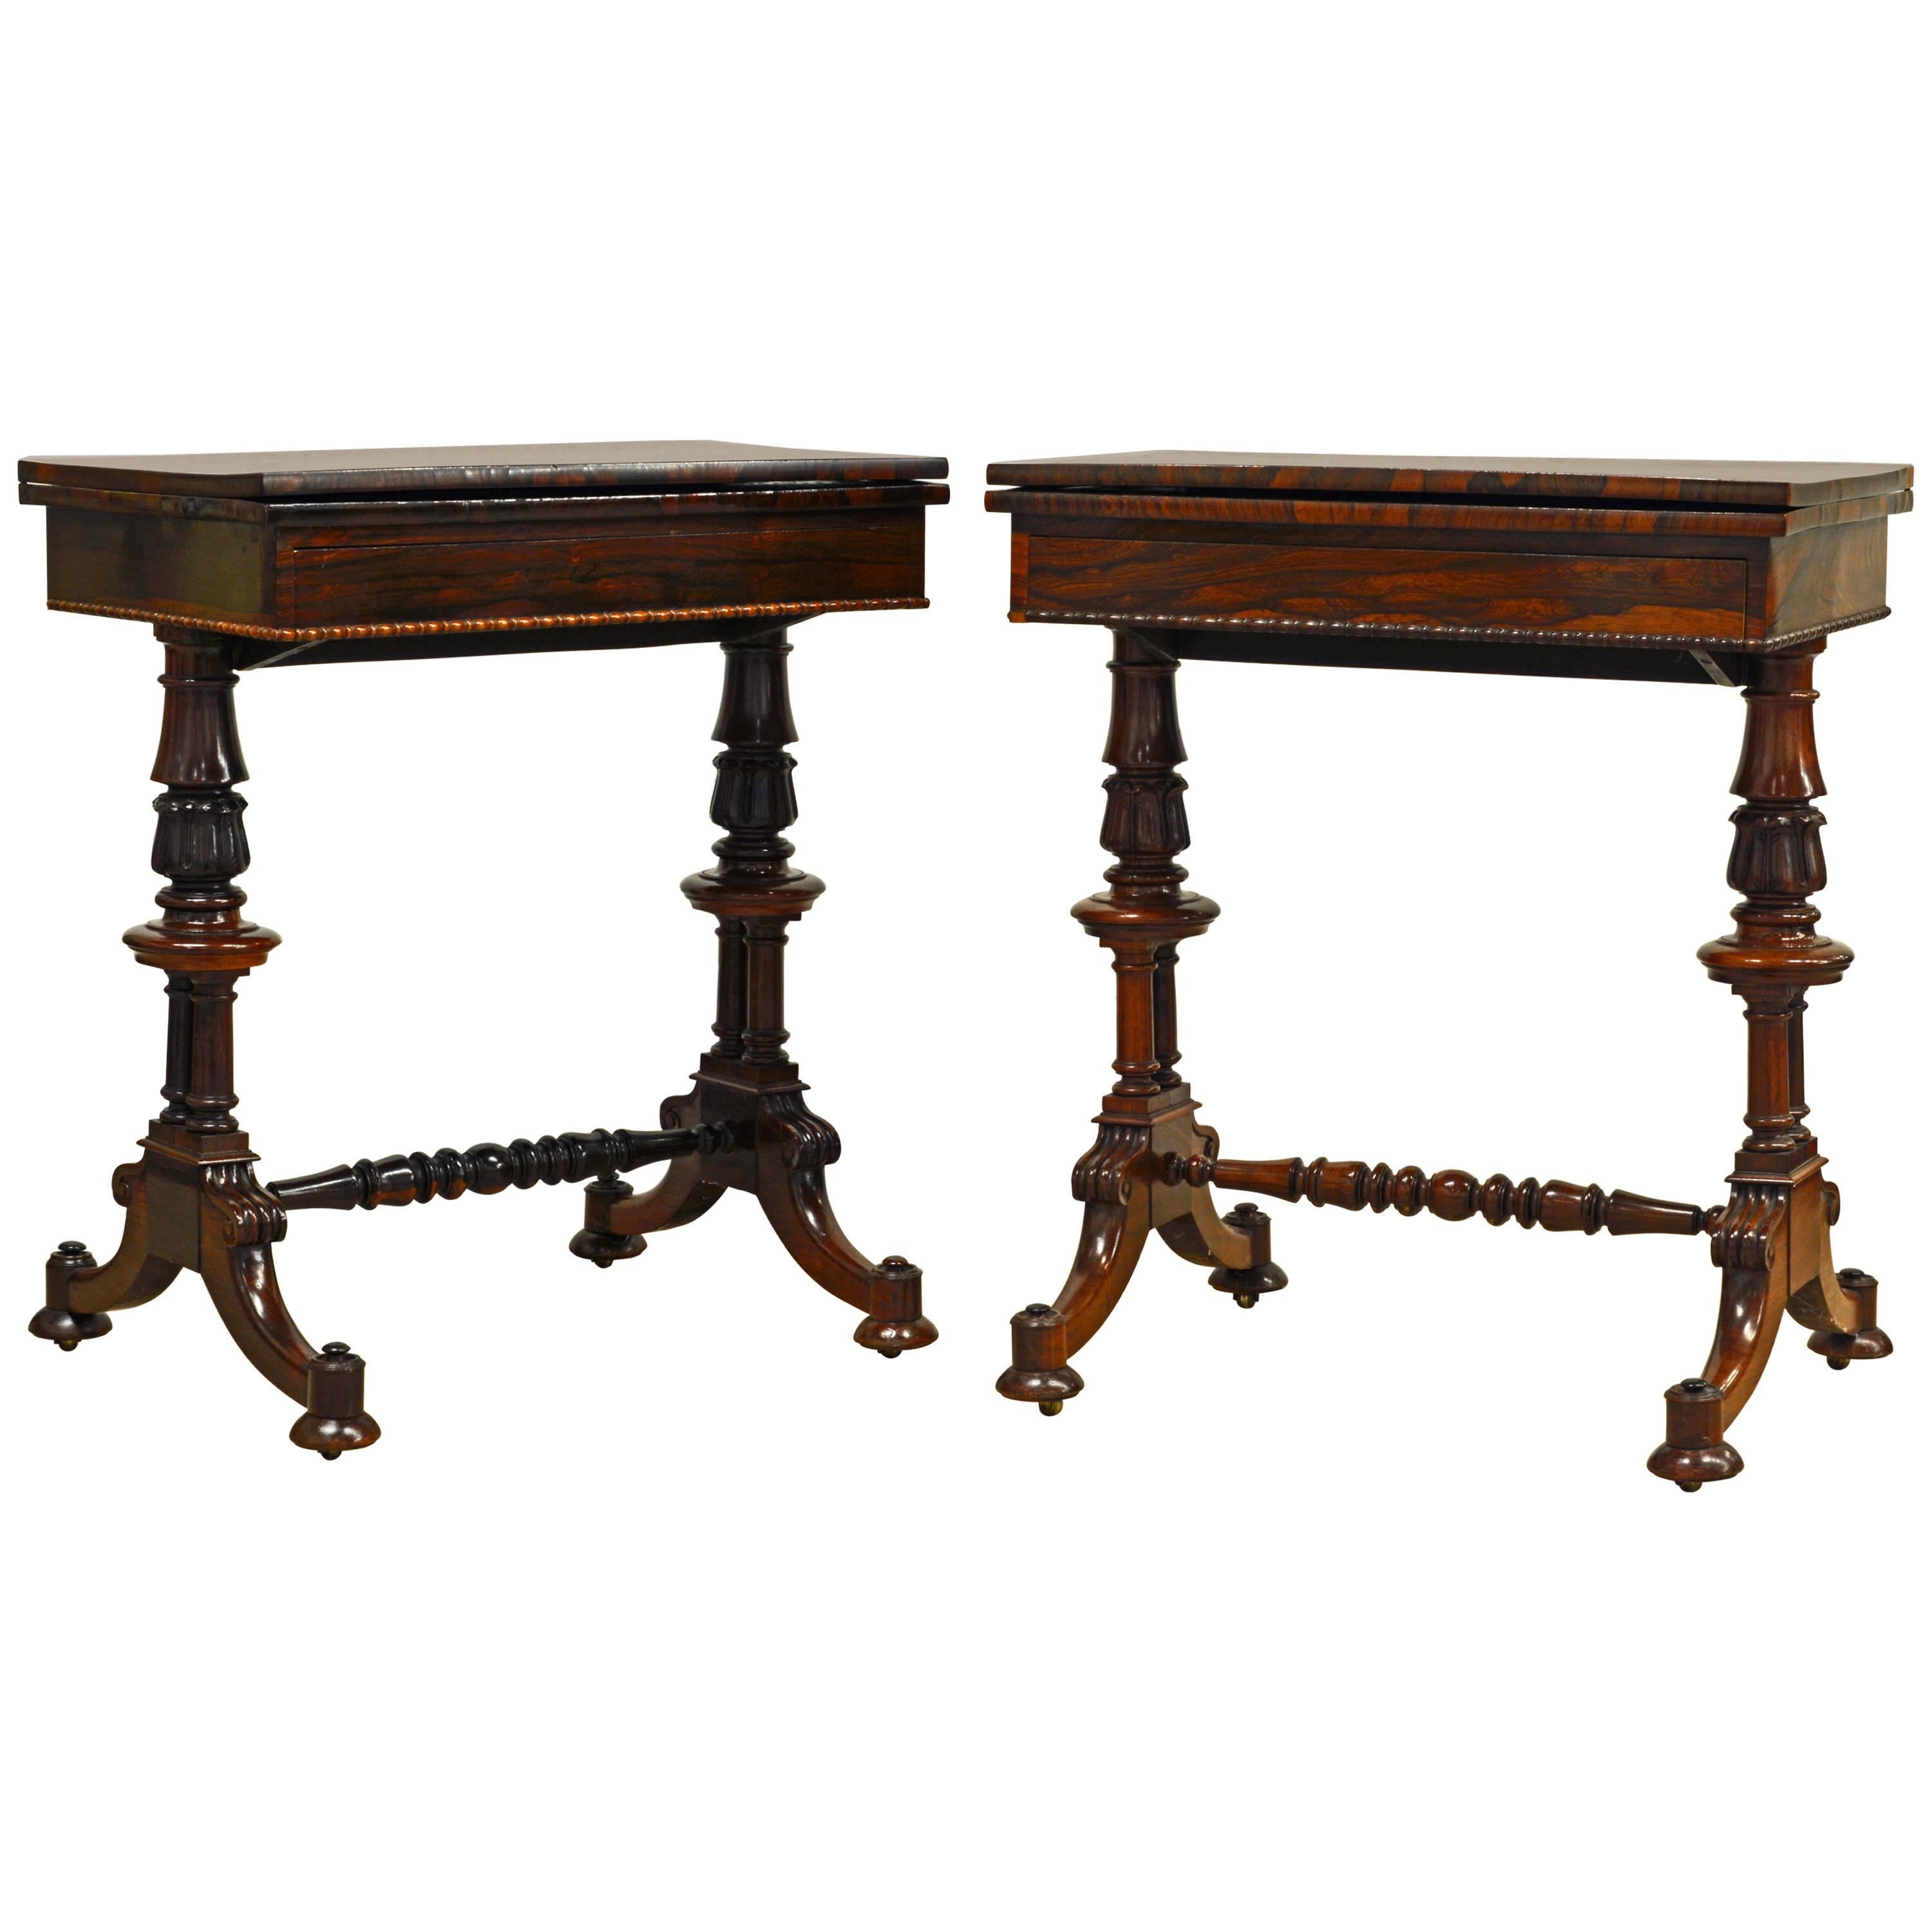 Rare Pair of Superior William IV Rosewood Twin Pedestal One Drawer Game Tables